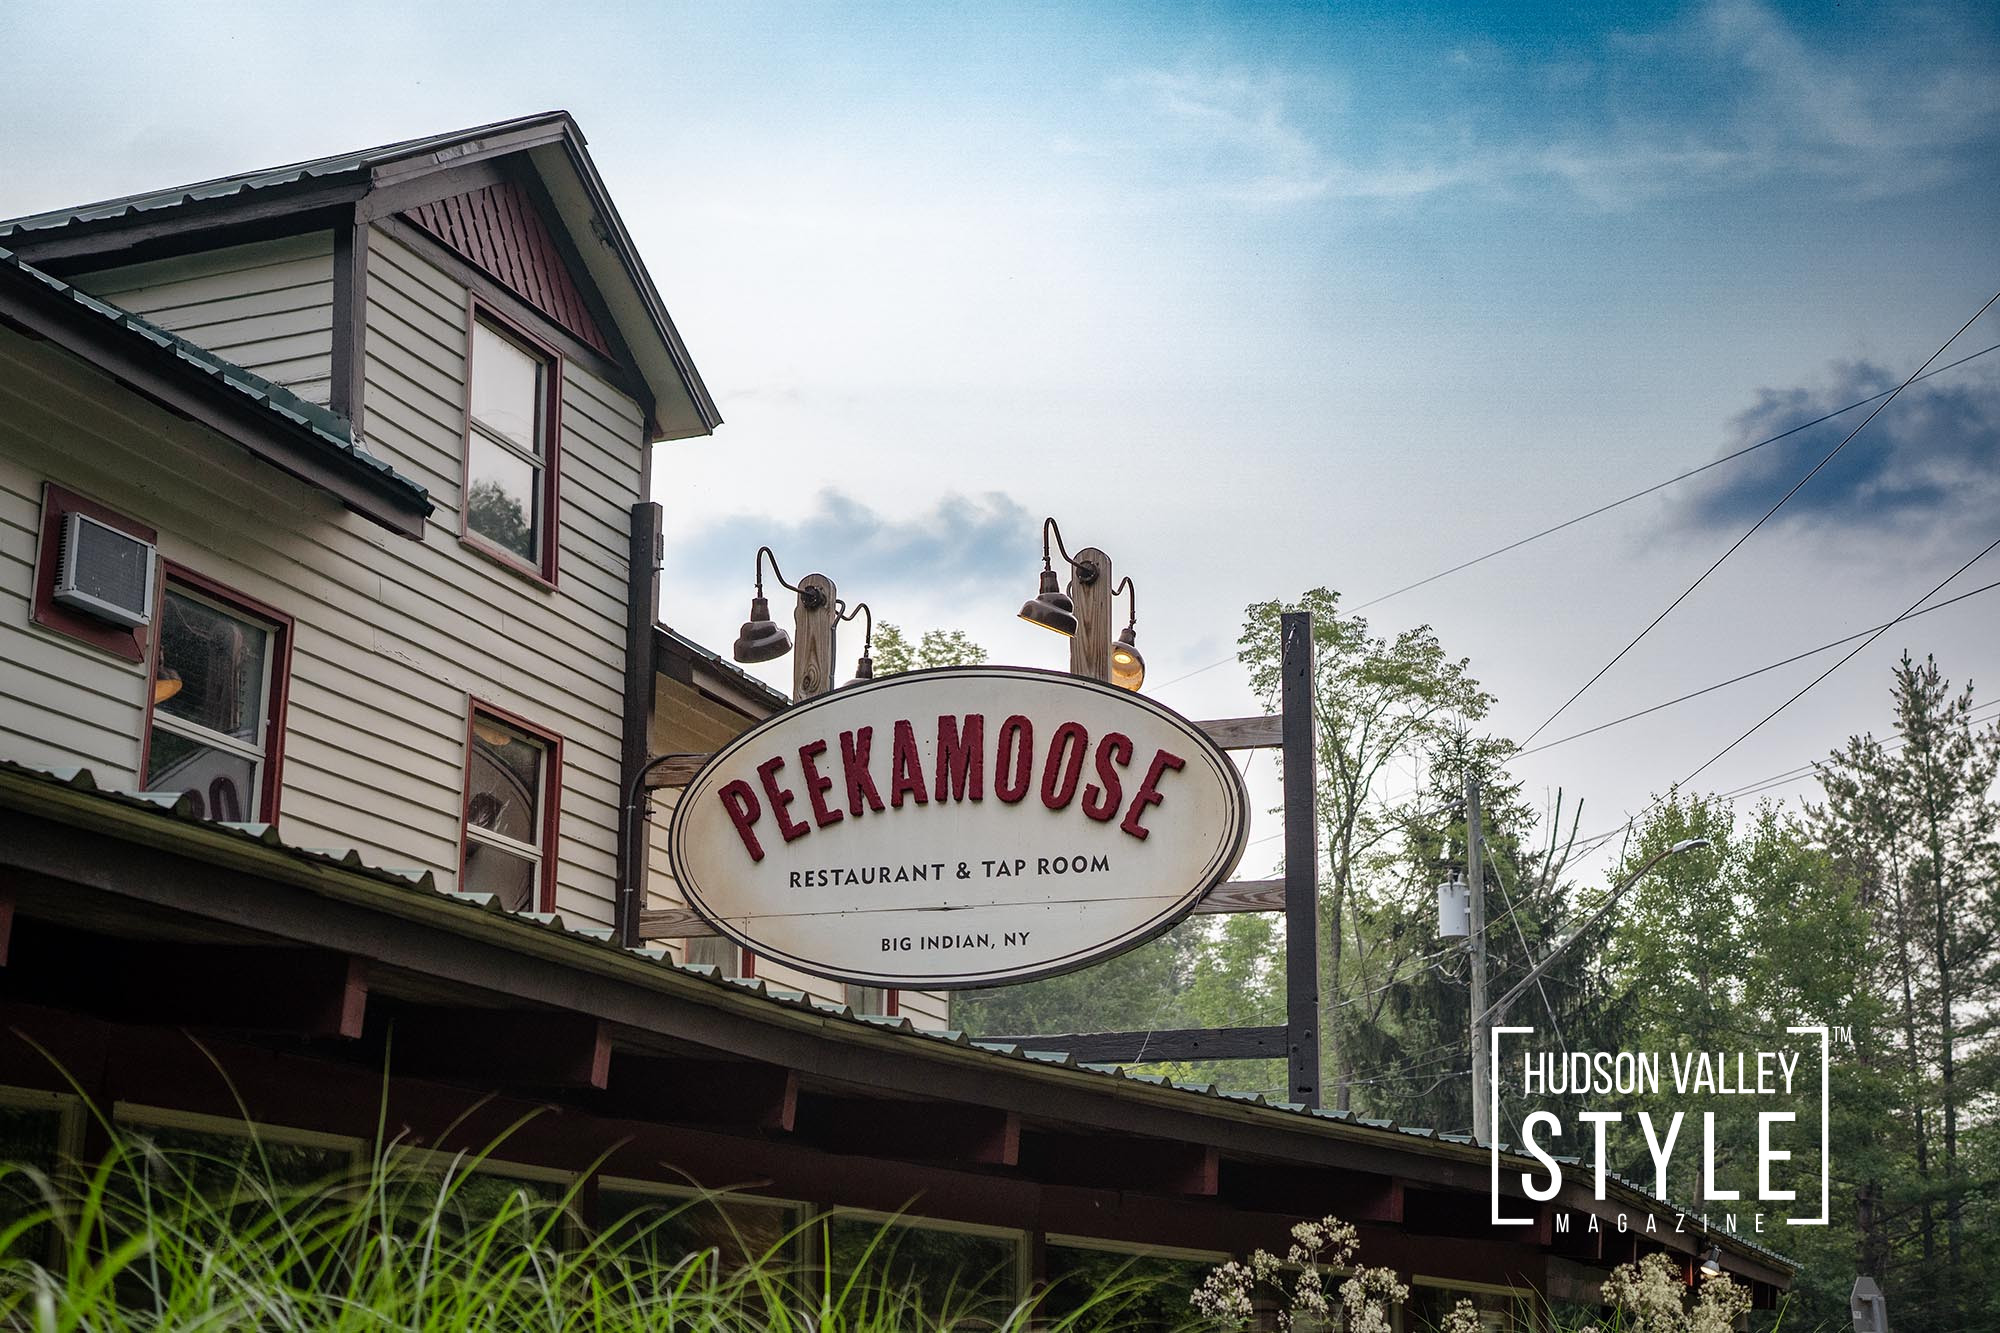 An Epicurean Journey through the Catskill Mountains: Unearthing the Charms of Peekamoose Restaurant & Tap Room – Big Indian, NY – Restaurant Reviews with Maxwell Alexander